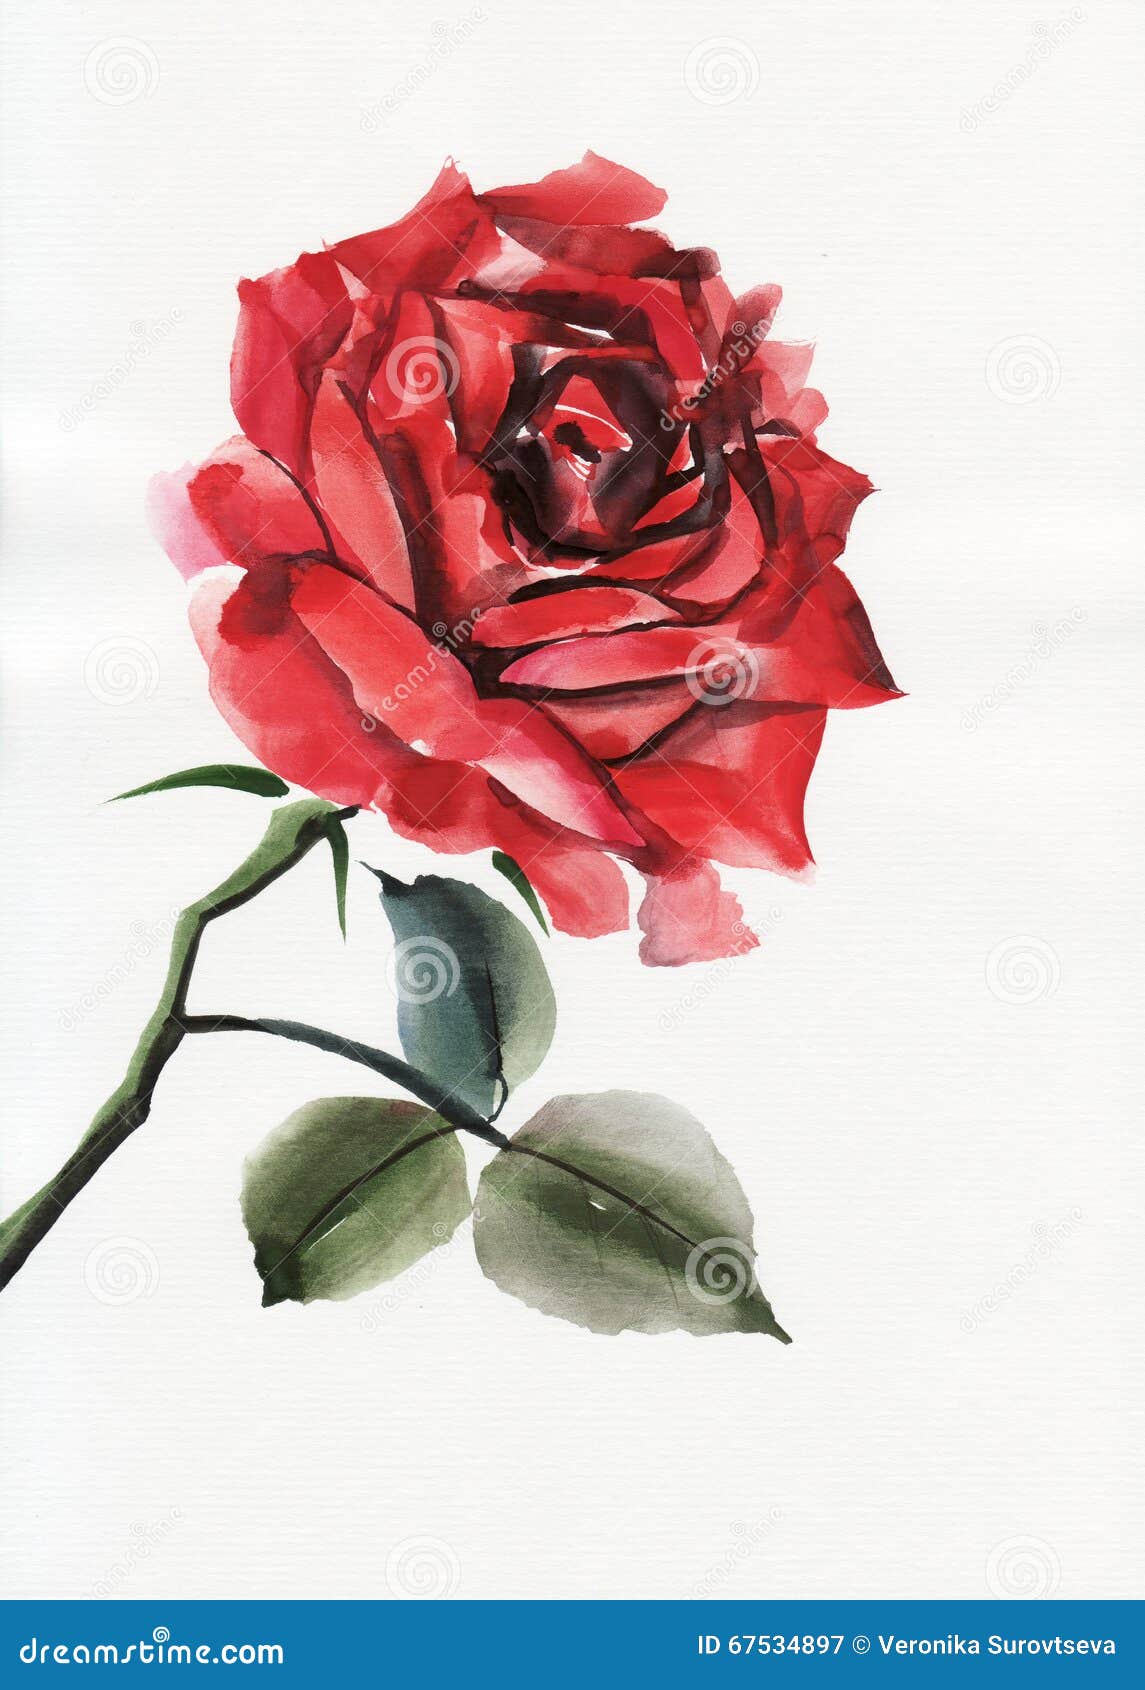 Red rose isolated stock illustration. Illustration of nature - 67534897